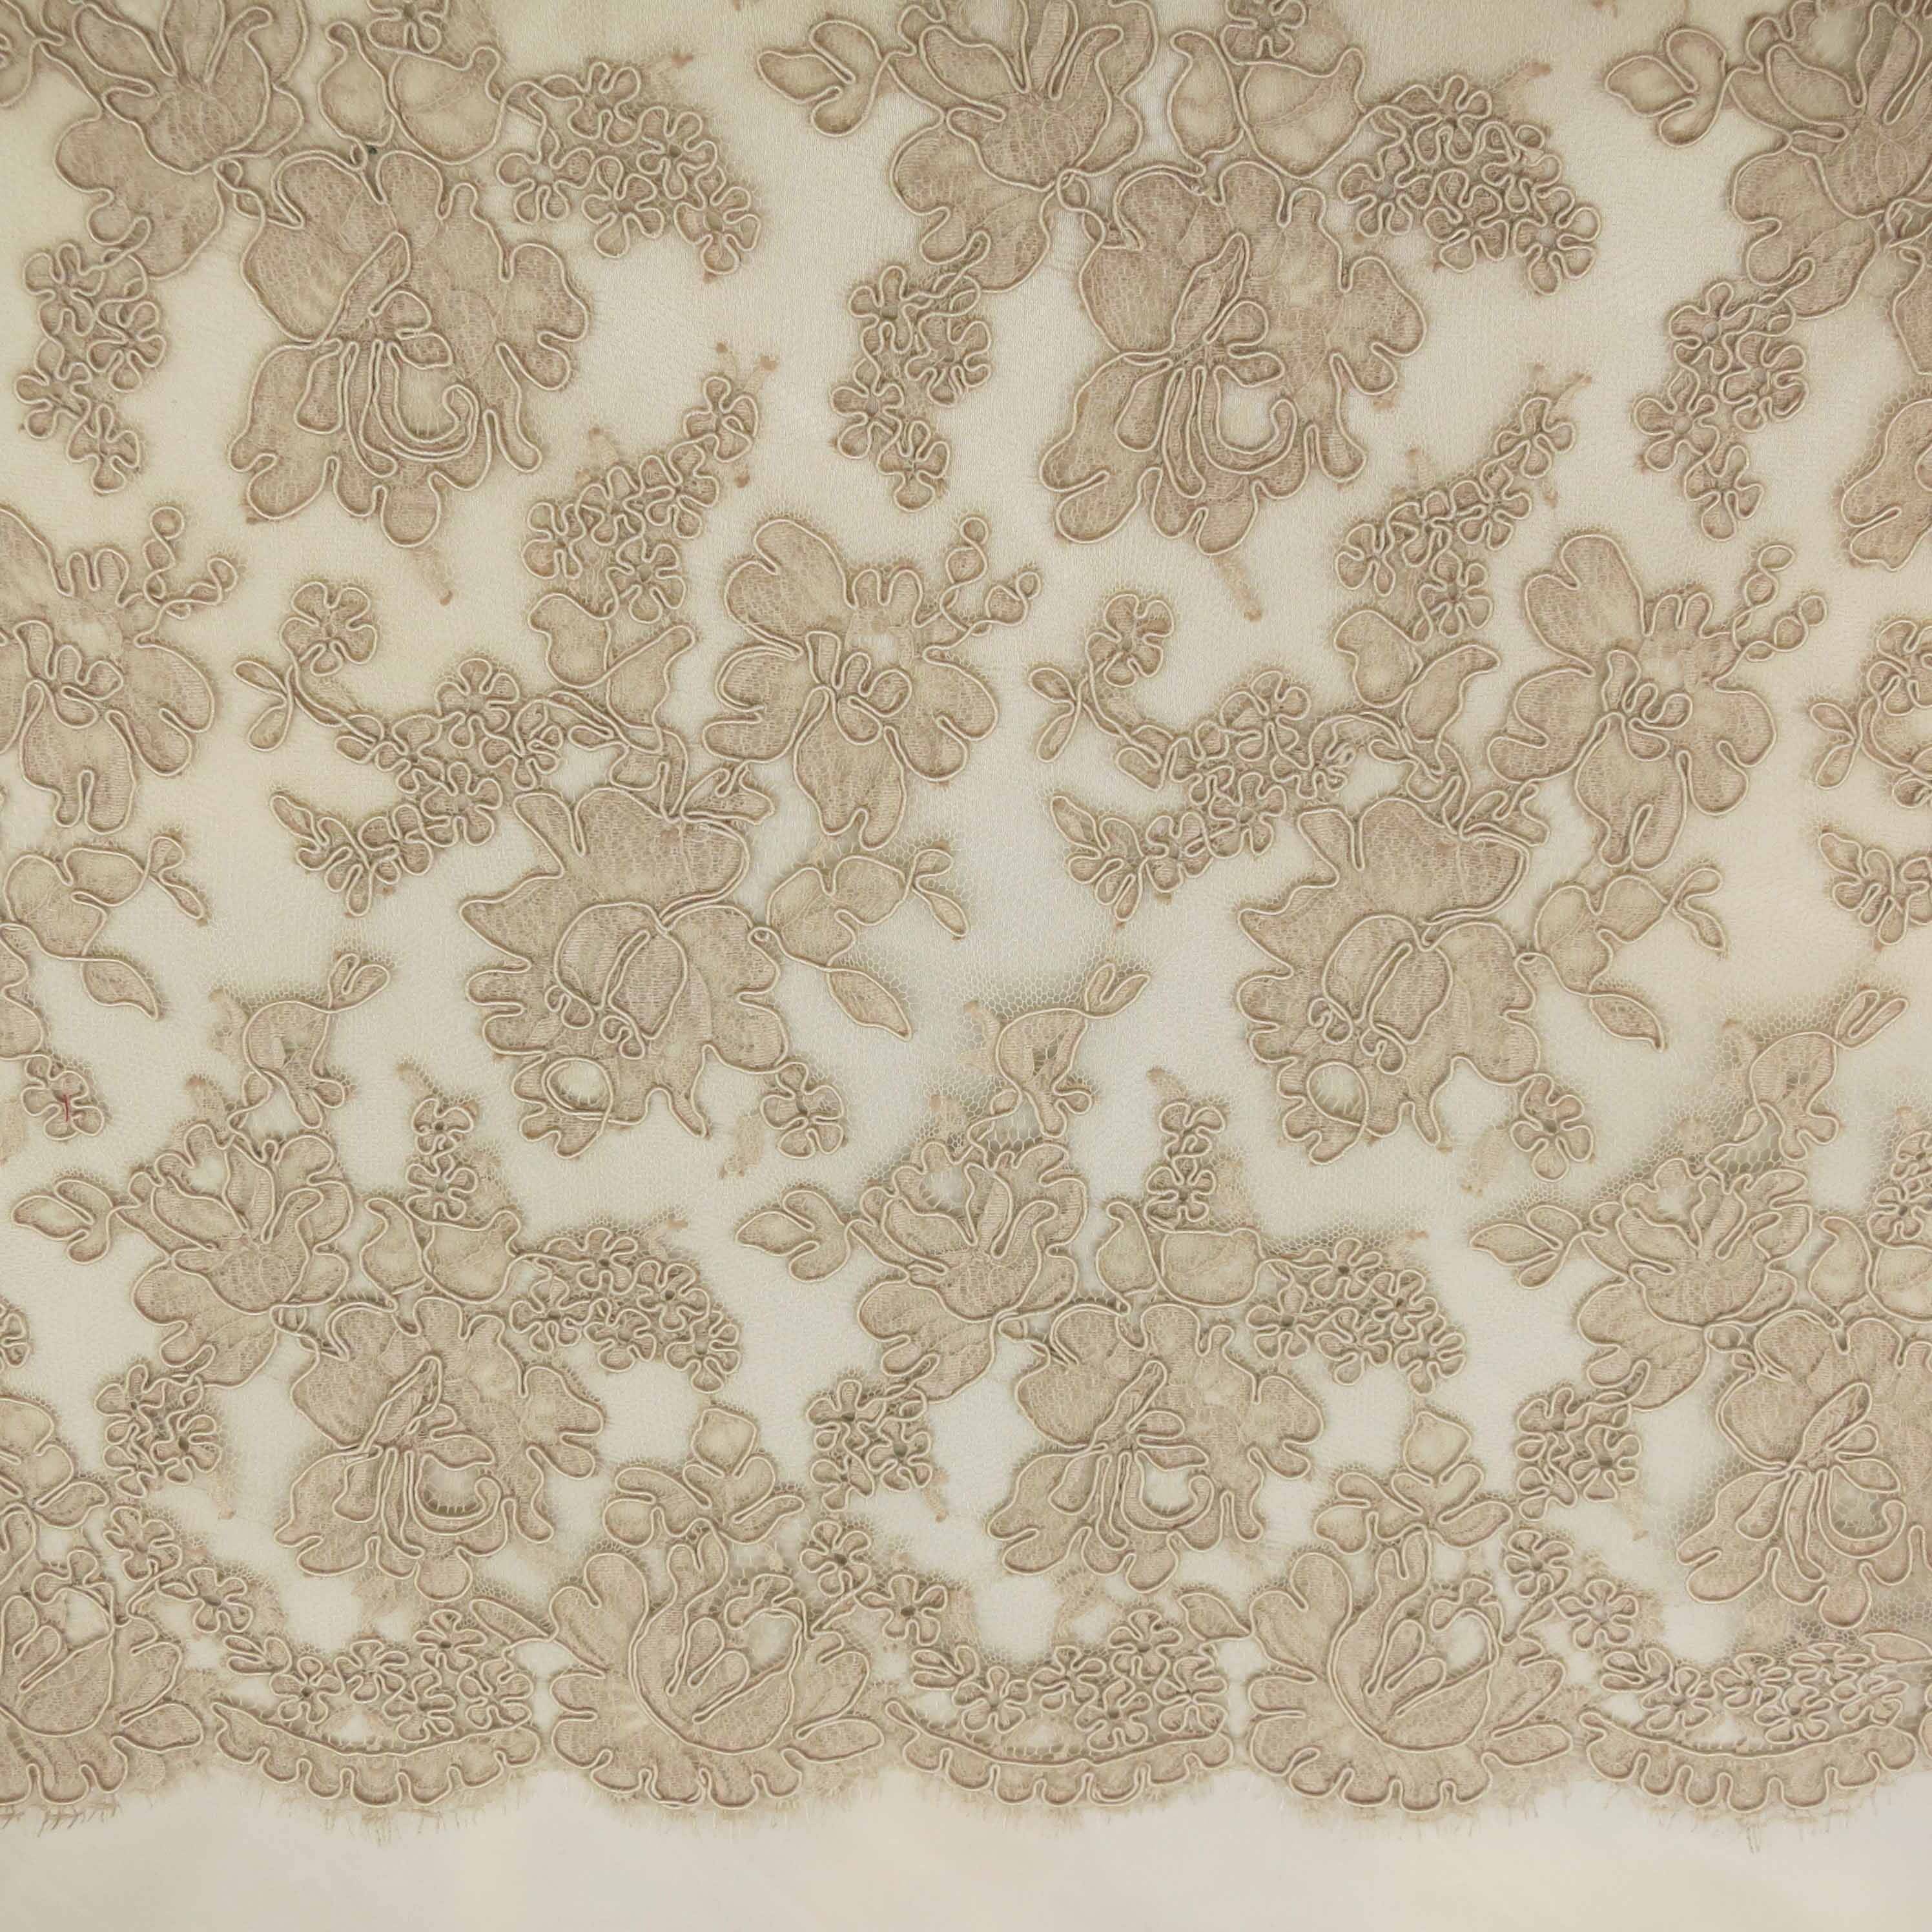 Beige Floral Corded French Lace